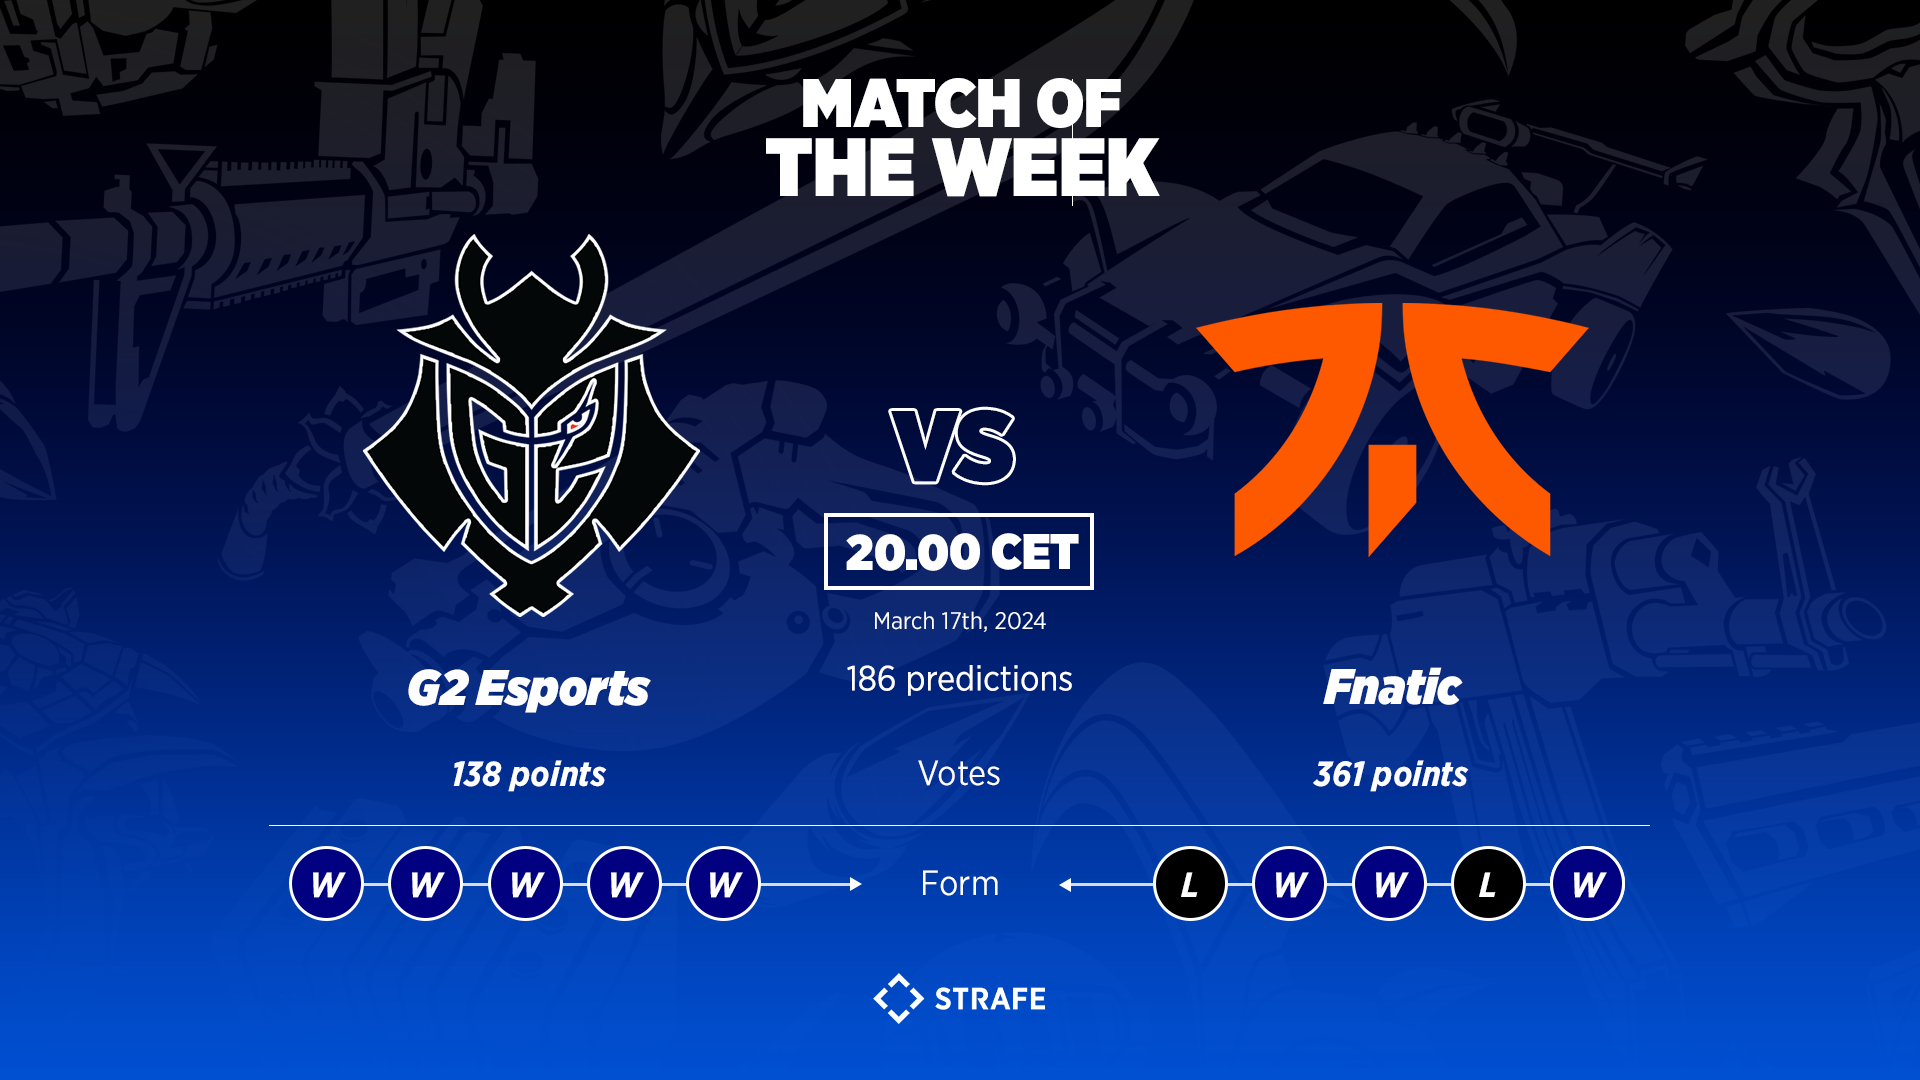 Strafe’s Match of the Week: G2 Esports take on Fnatic in El Classico Spring Split Match